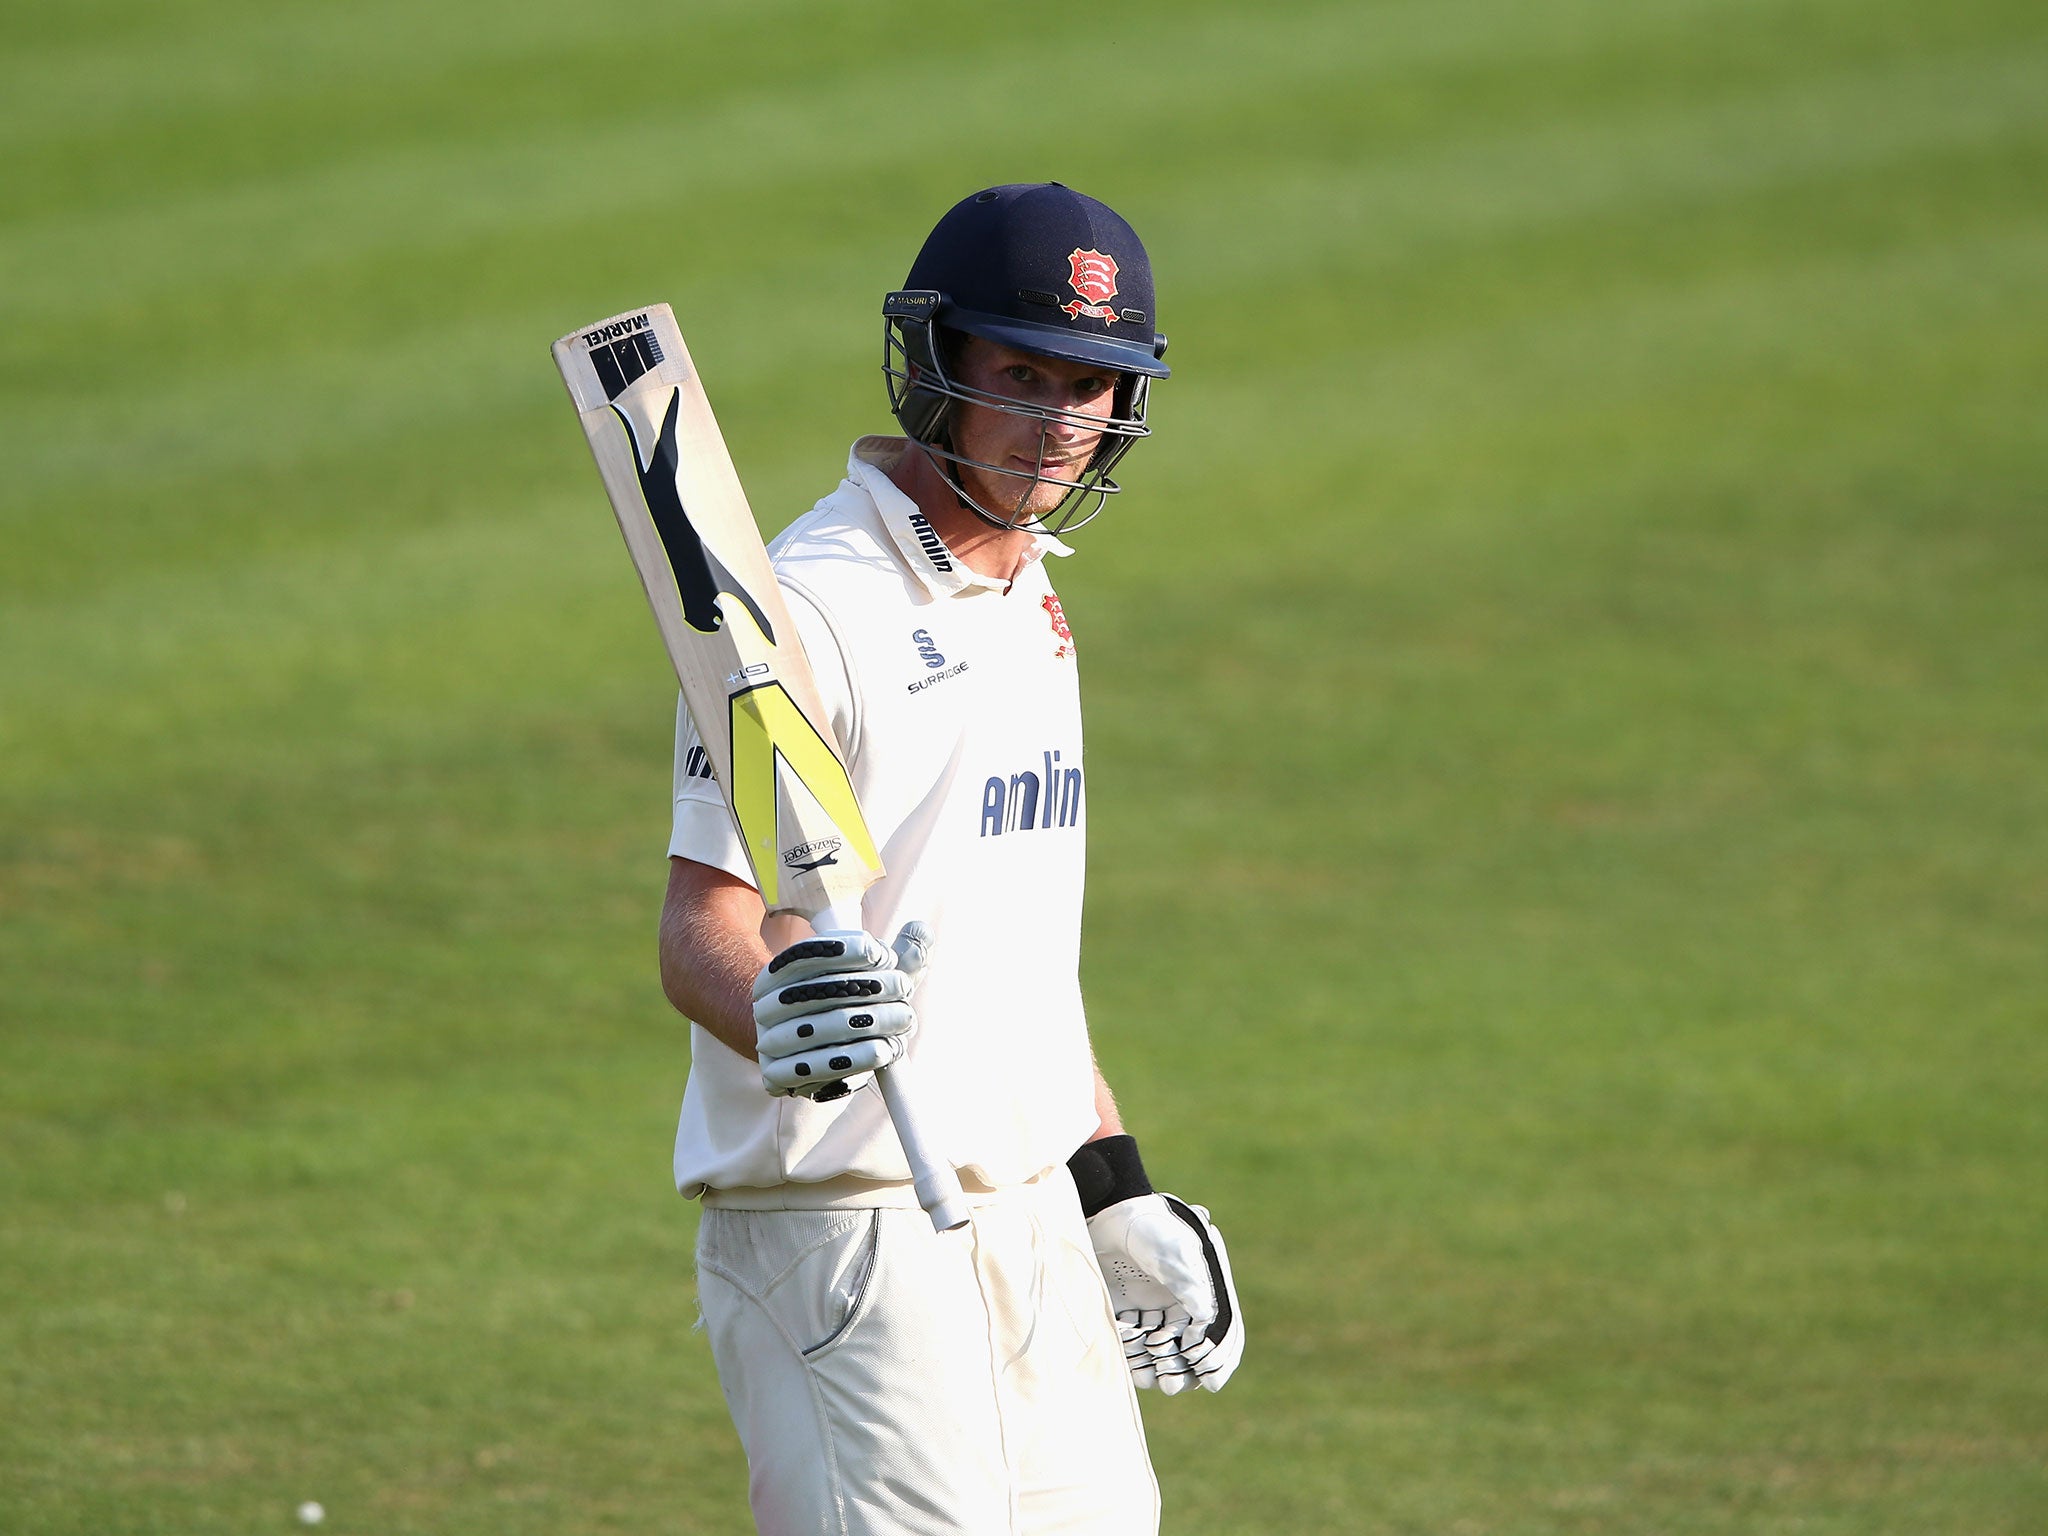 Back in 2015 he scored a notable century for Essex against the touring Australians